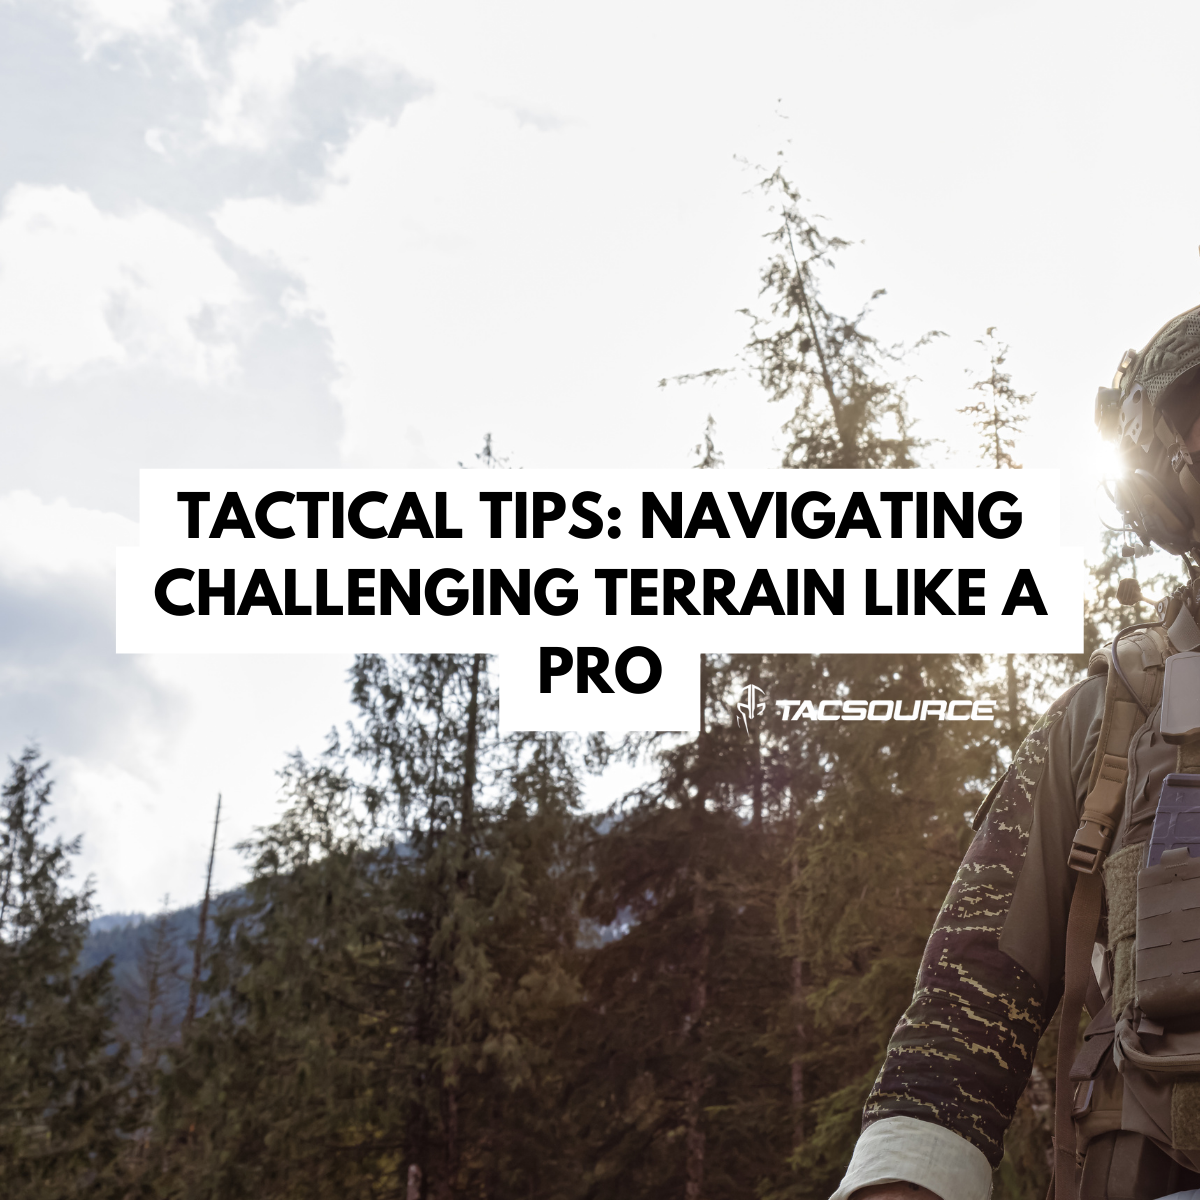 Tactical Tips: Navigating Challenging Terrain Like a Pro